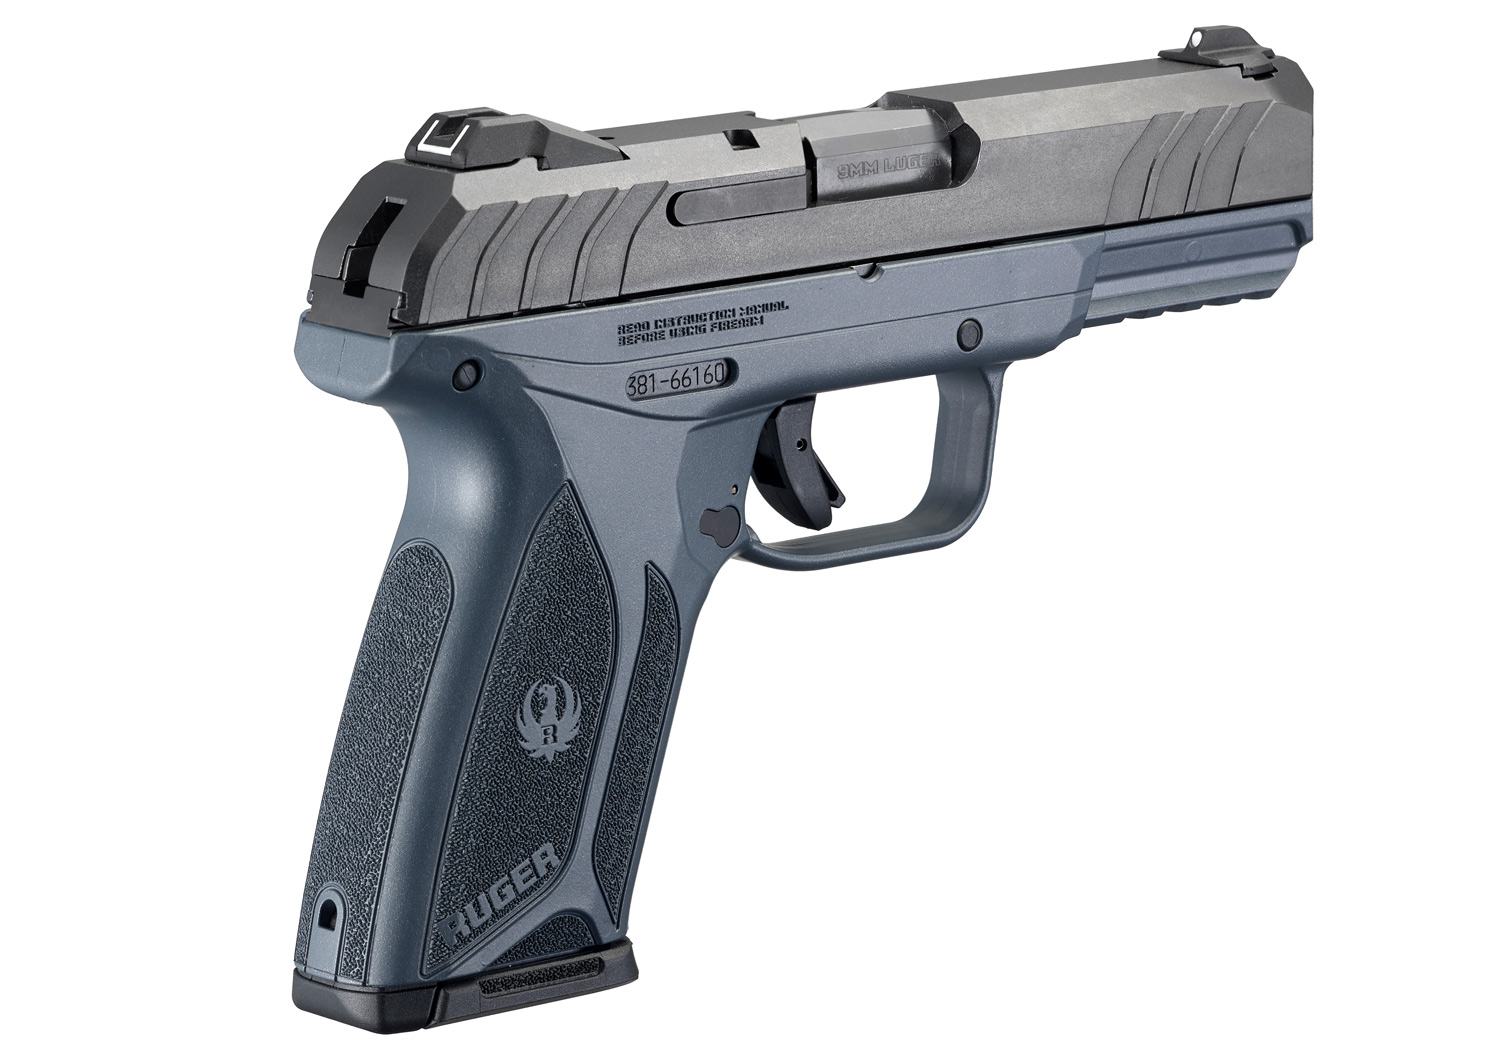 Compact for easy concealment, the Security-9 ® is designed to fit a variety...